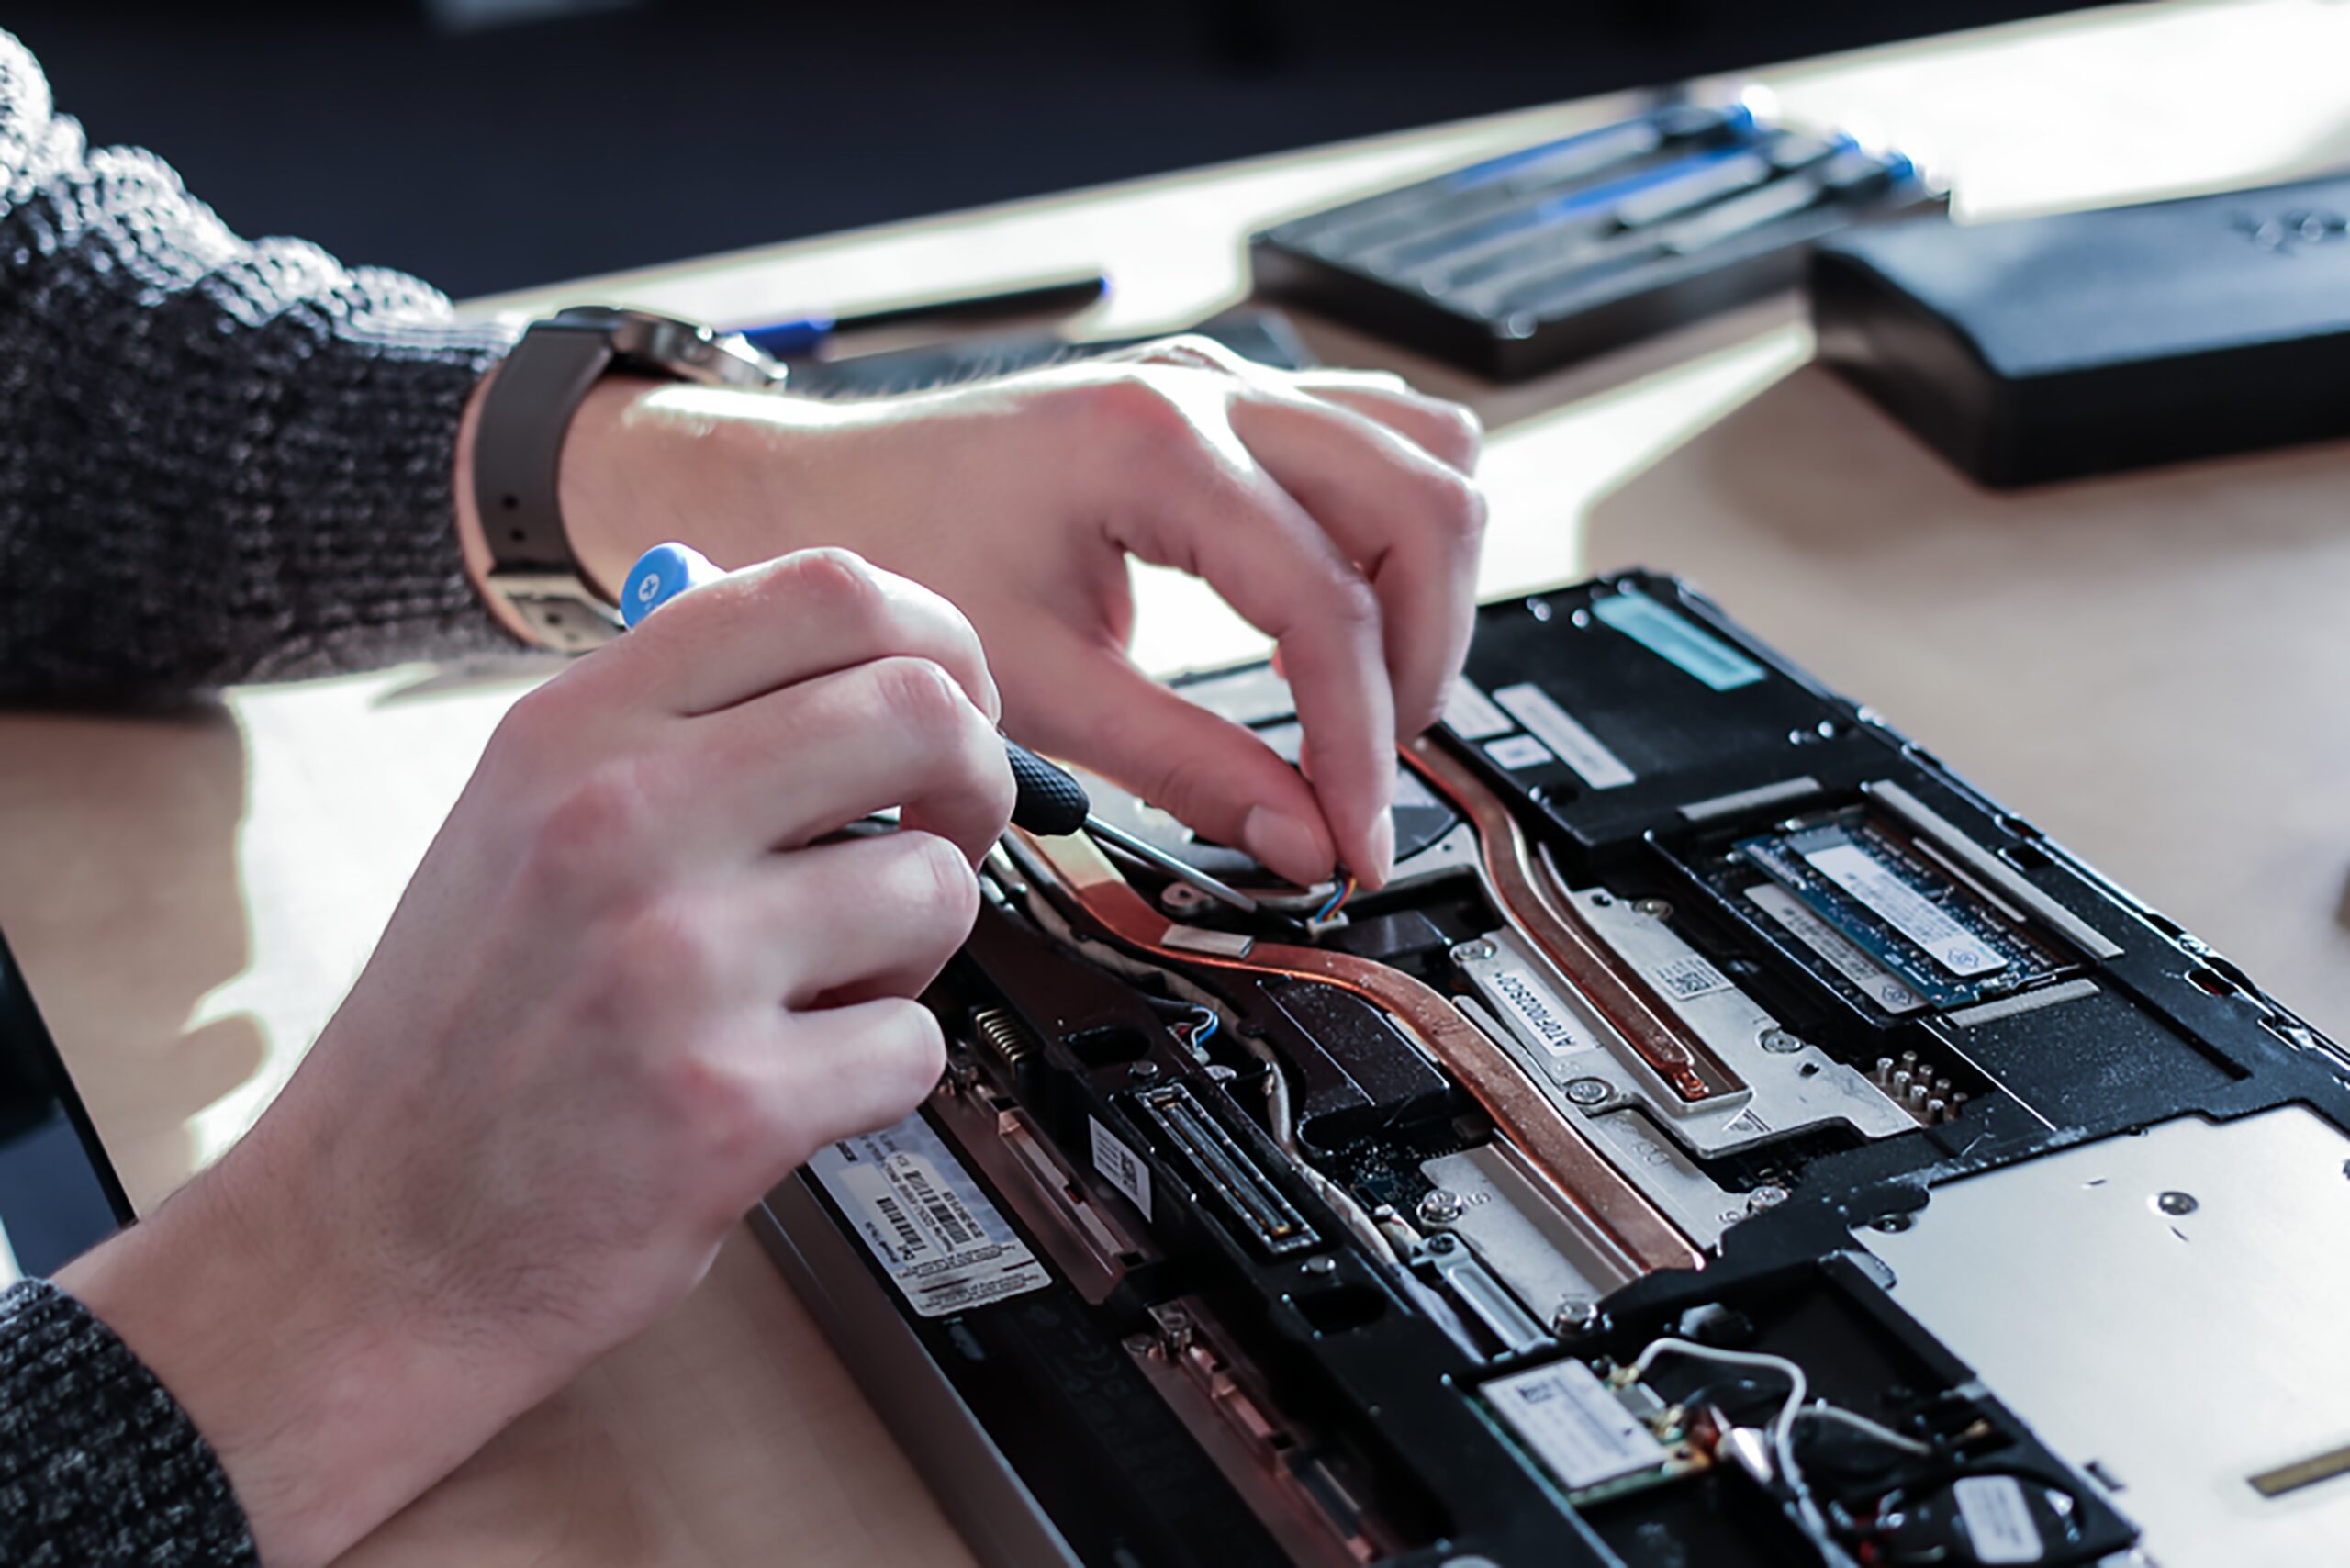 A laptop being repaired with iFixit tools